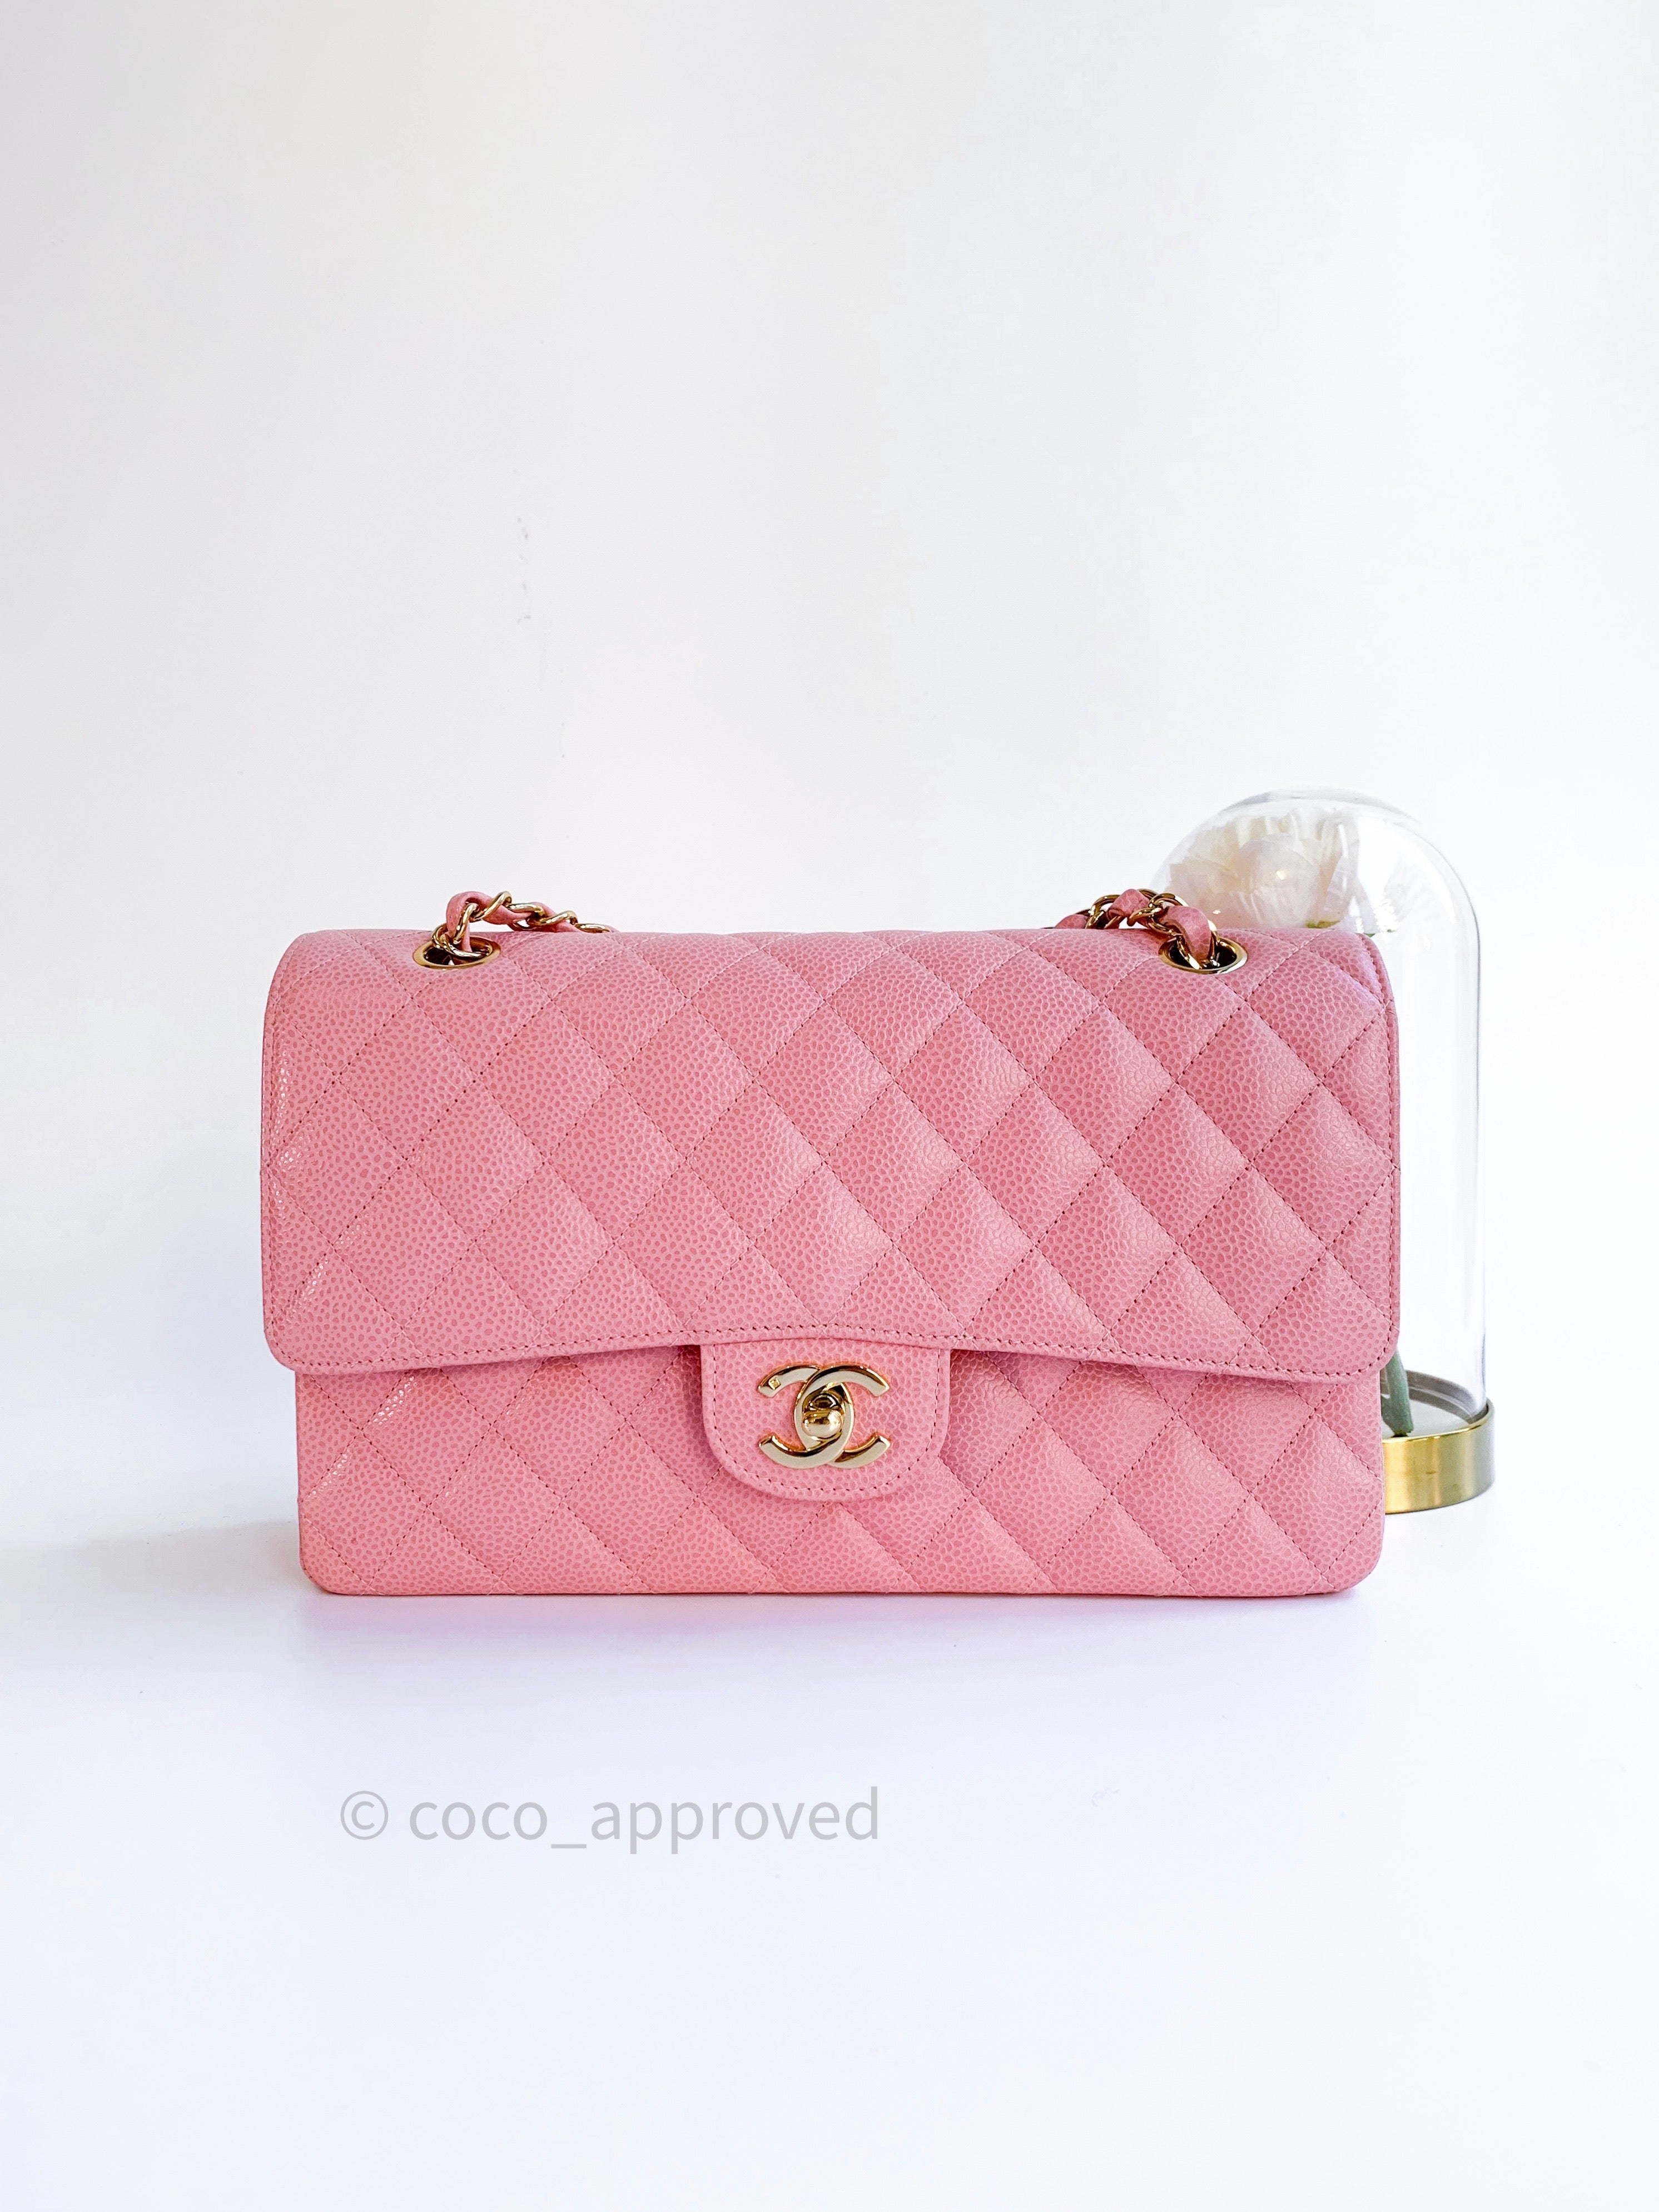 chanel pink classic bag